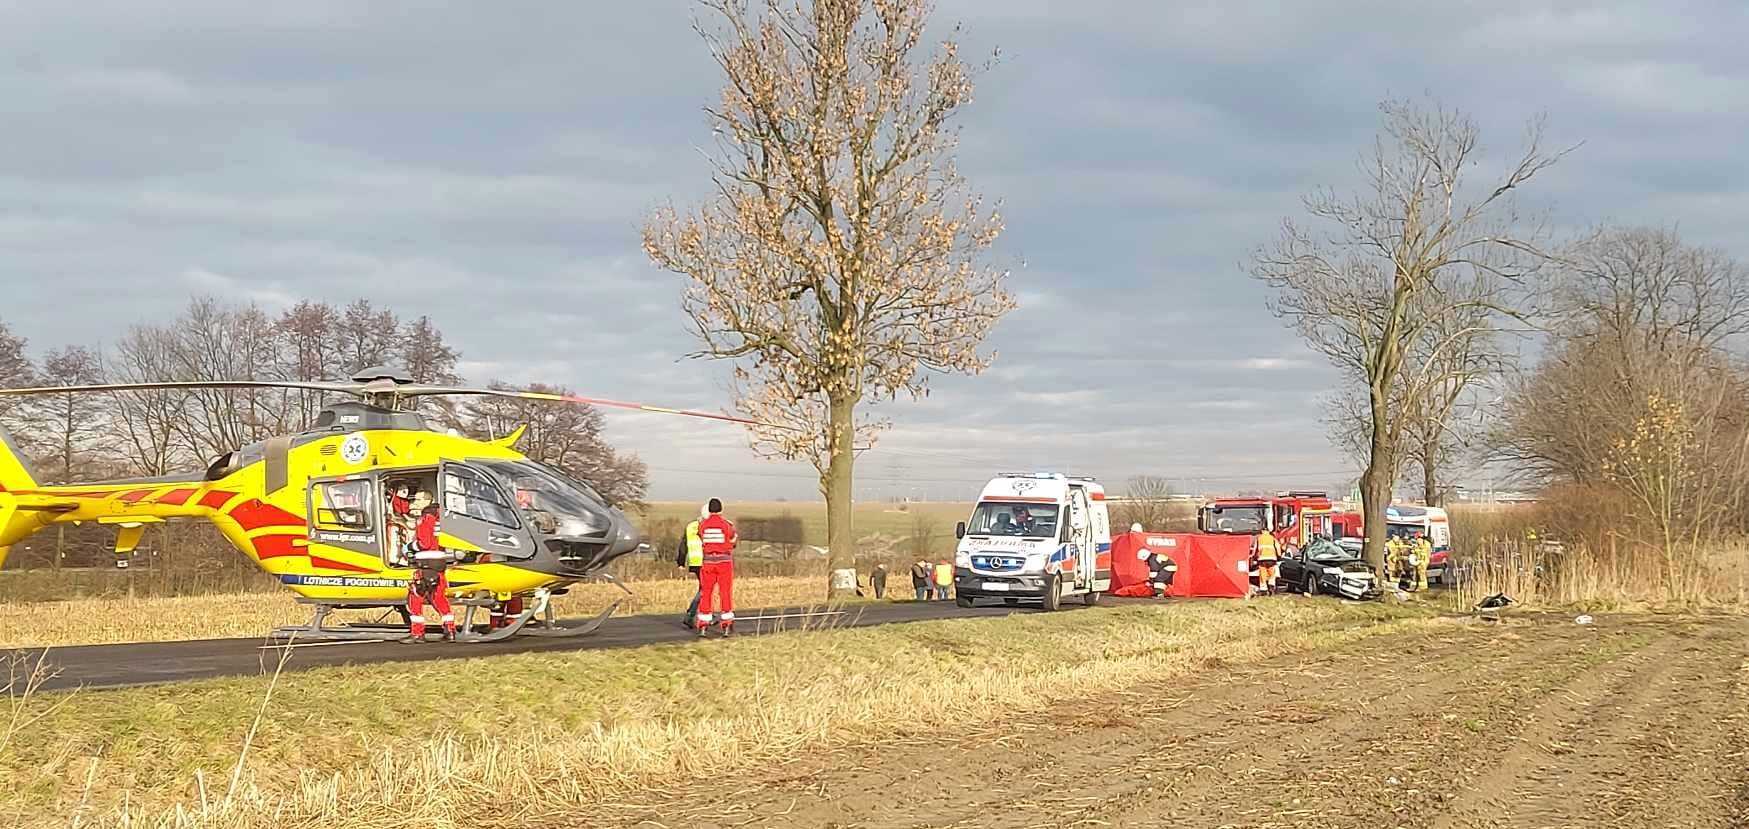 In Poland there was a road accident involving two Audi, killed three Ukrainians. Photo